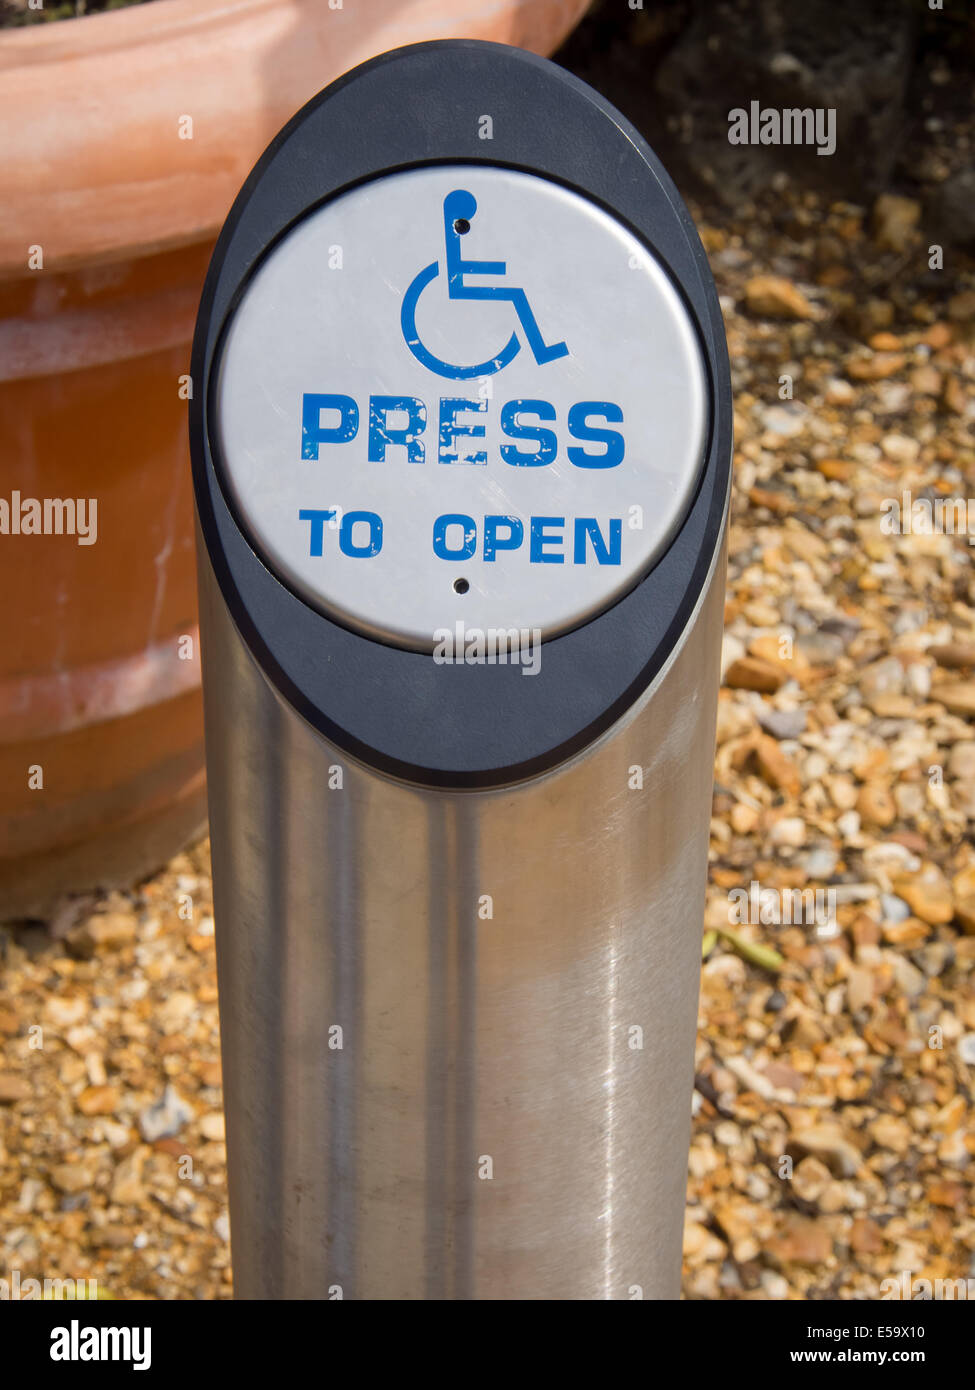 A disabled door access button on a post Stock Photo